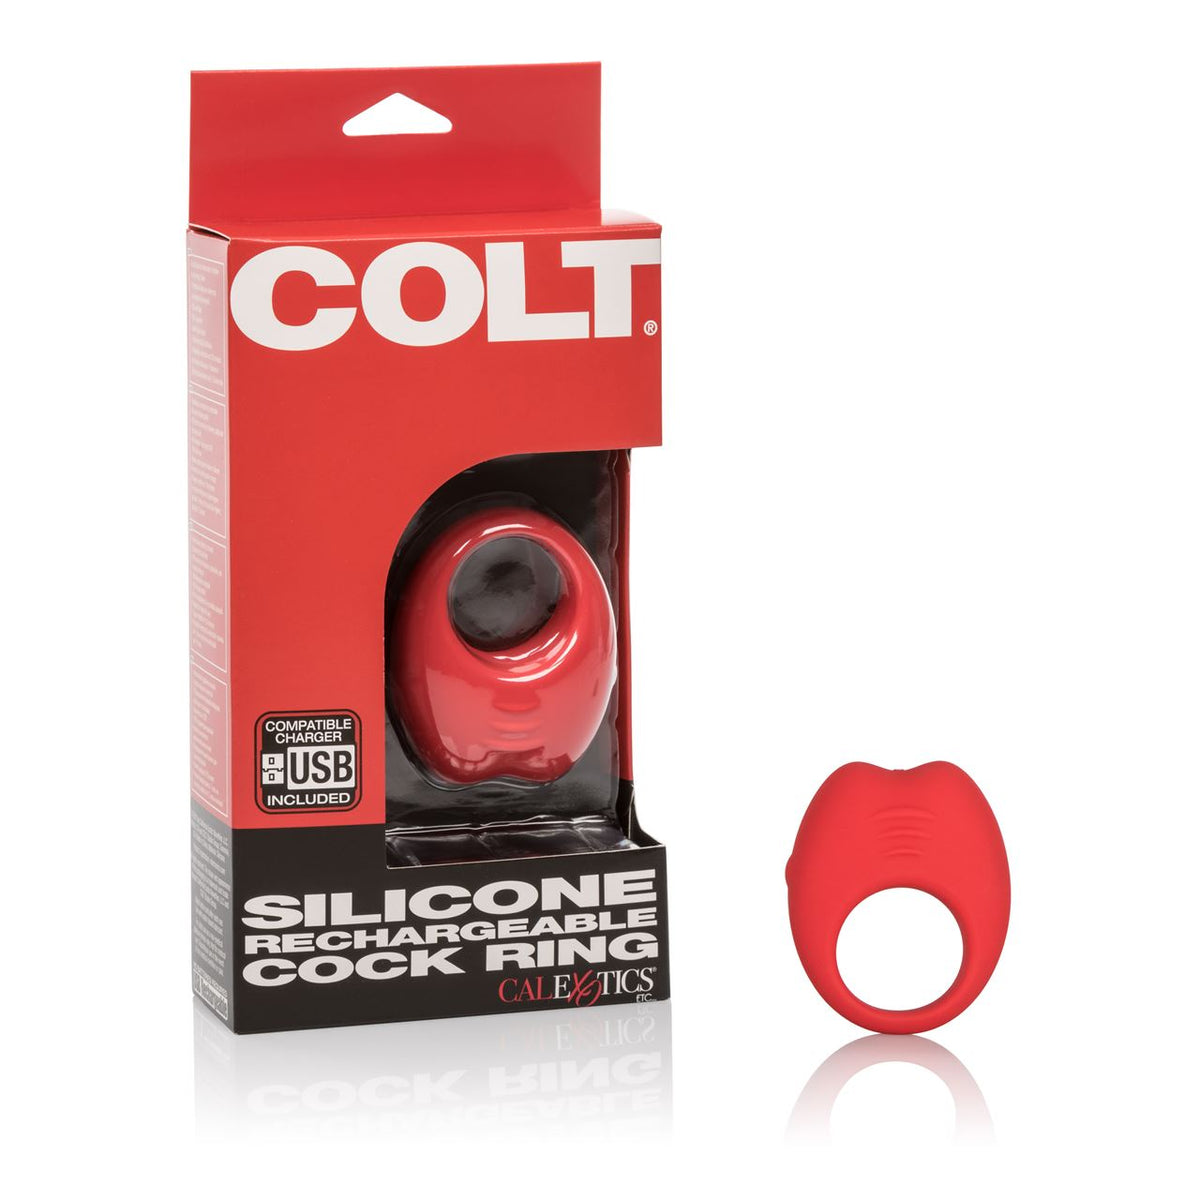 COLT Silicone Rechargeable Cock Ring - Red